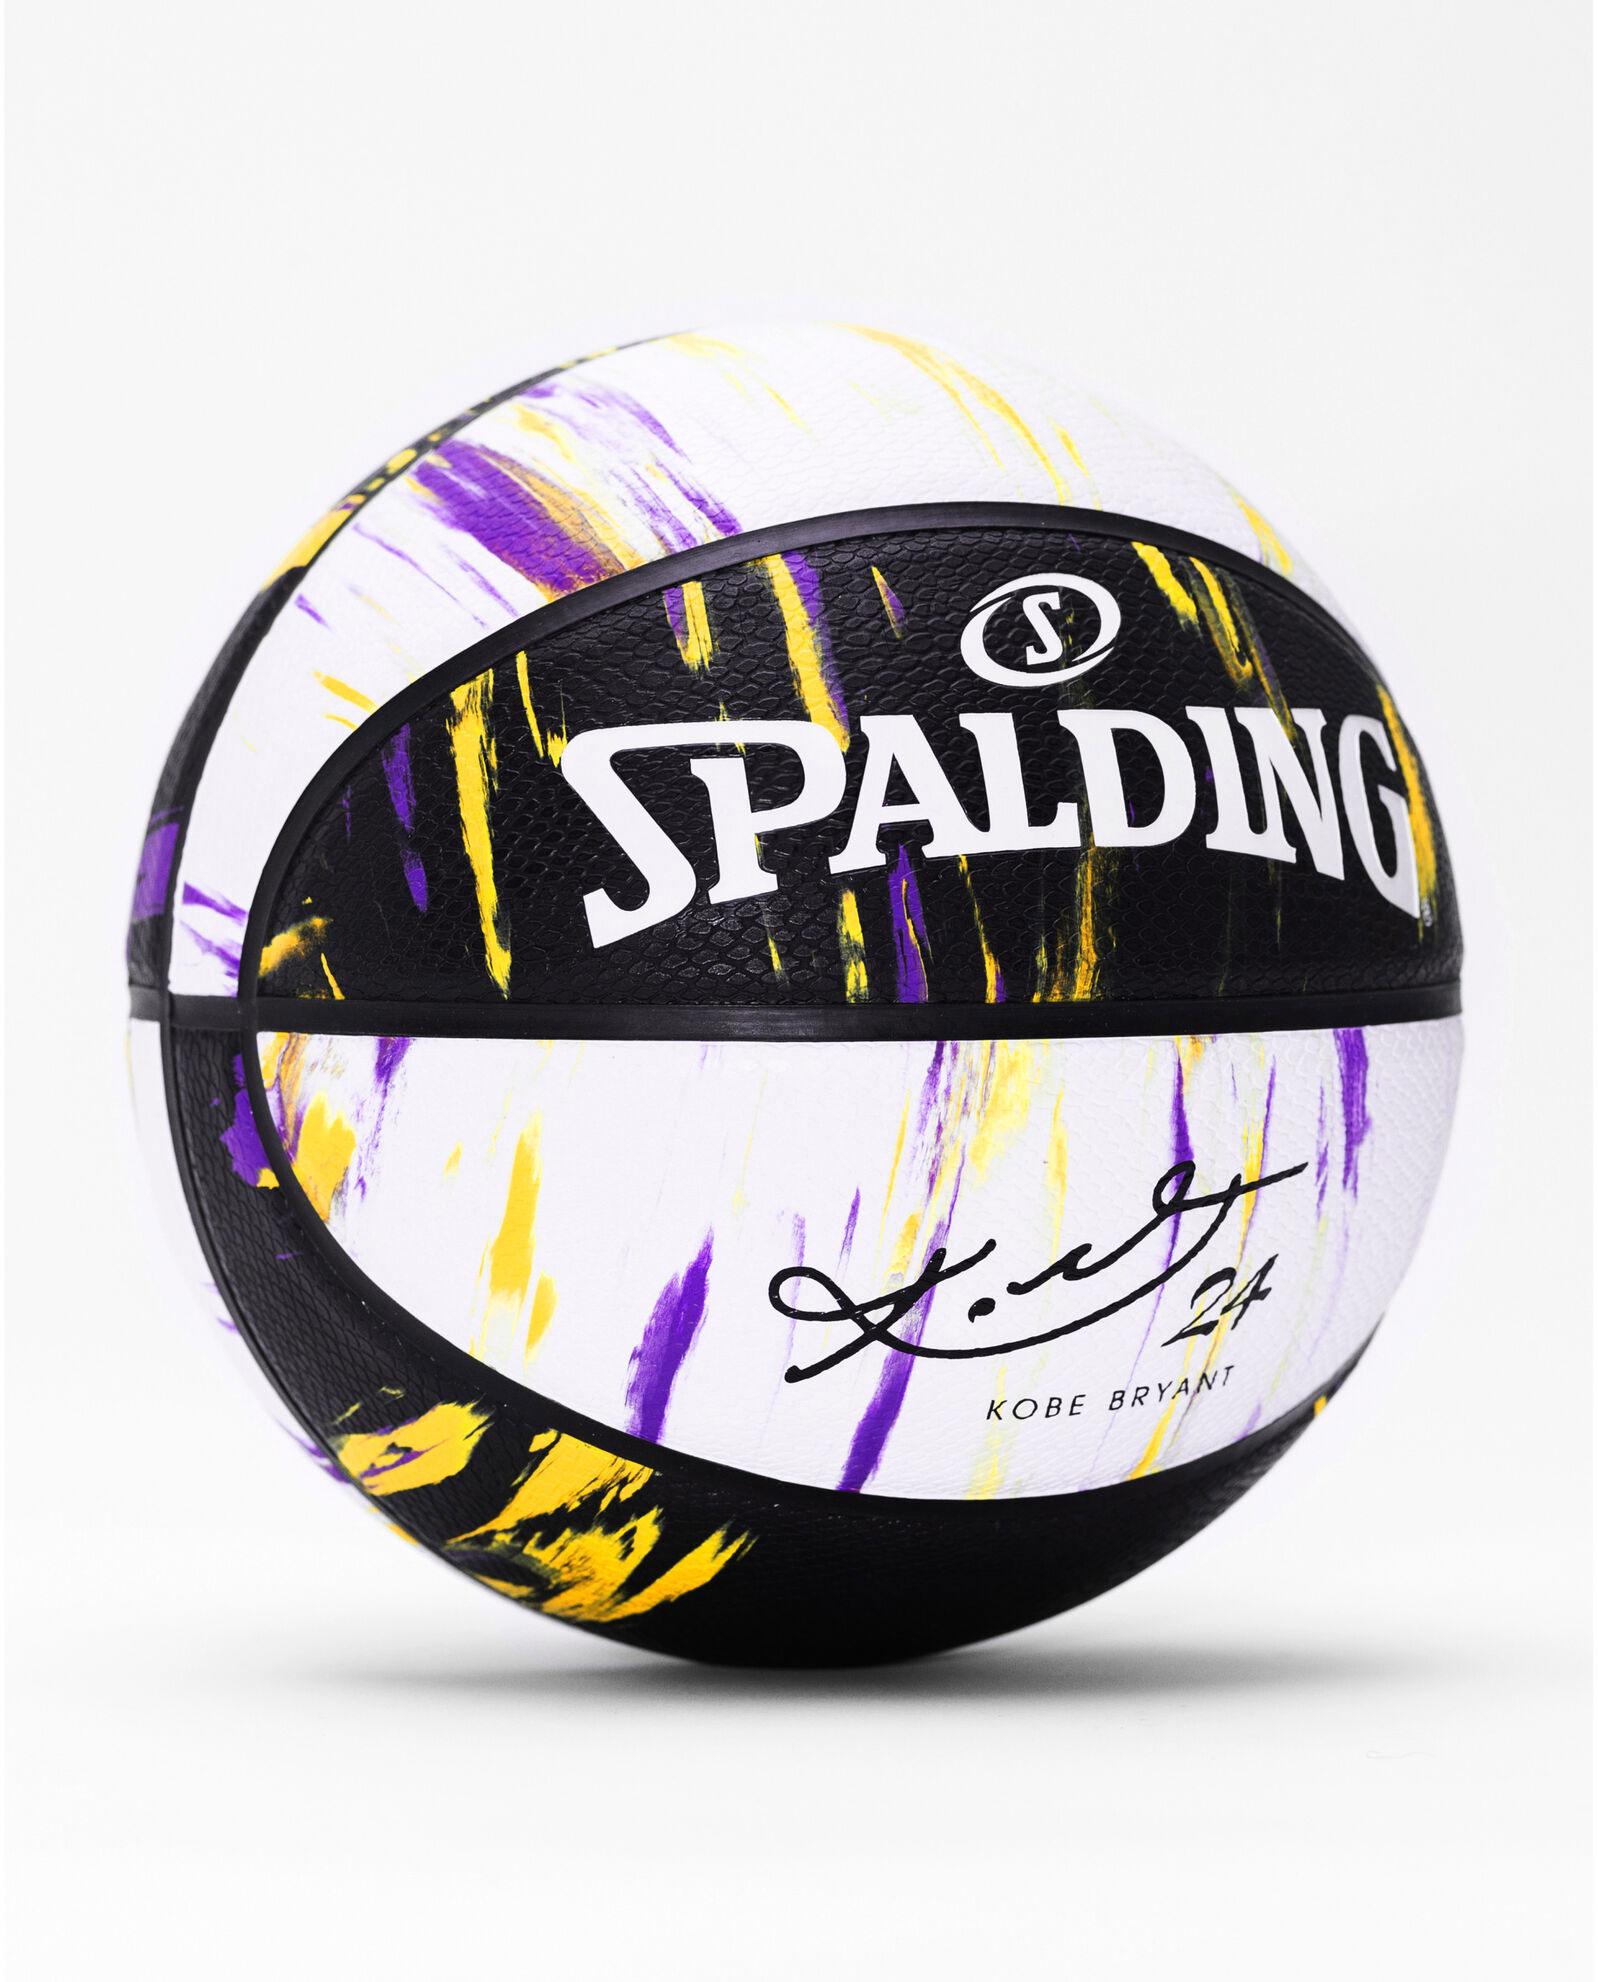 Details about   NEW SPALDING Basketball KOBE BRYANT Marbled Series LIMITED EDITION LAKERS COLORS 